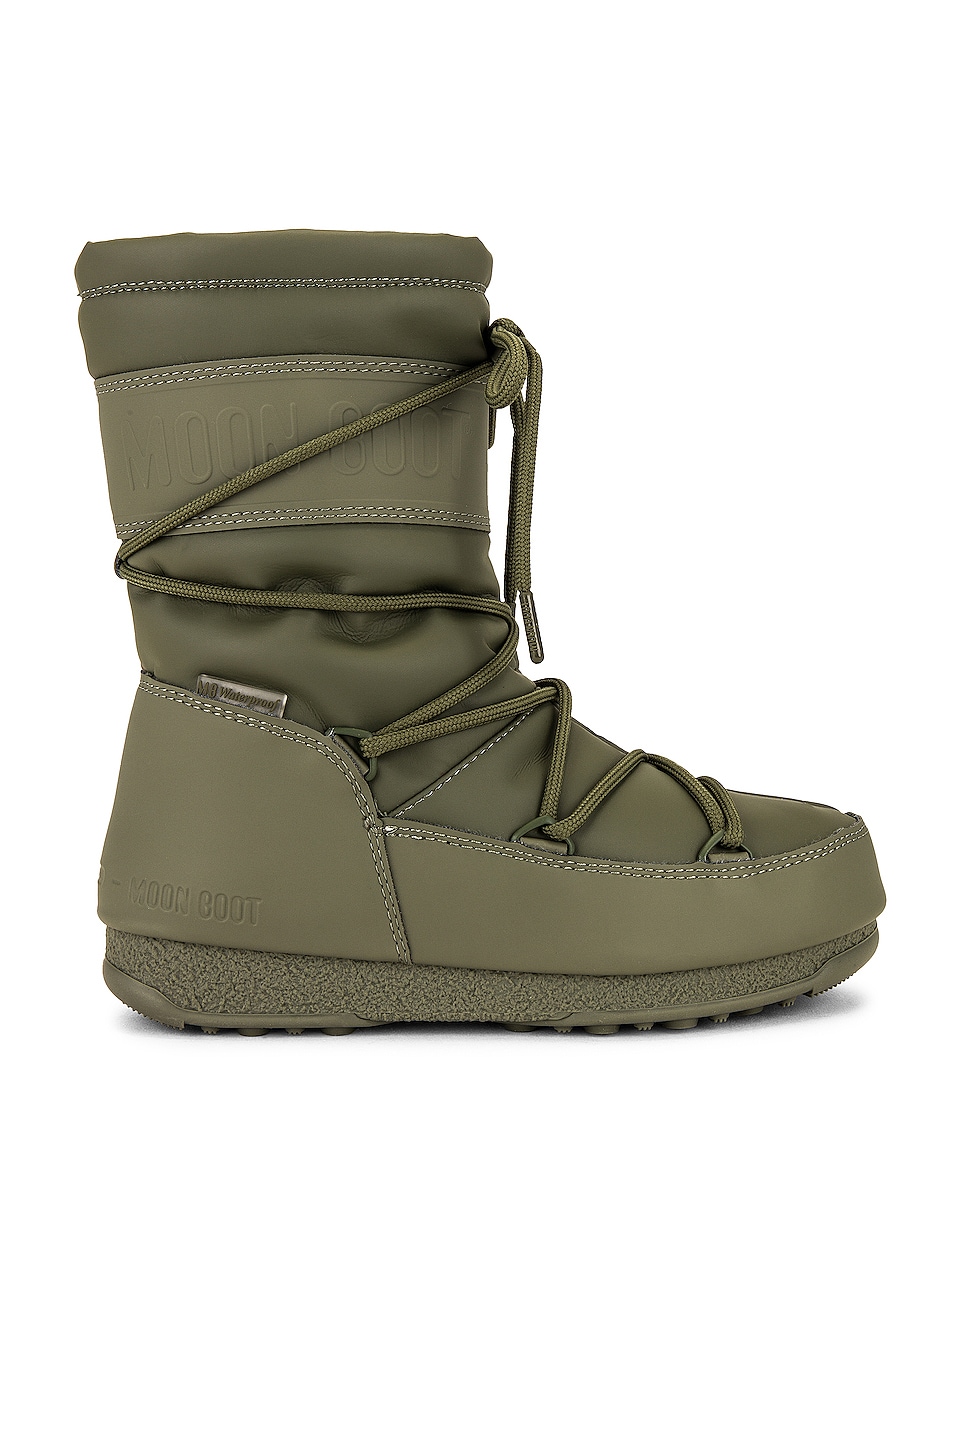 MOON BOOT Mid Rubber WP Boot in Khaki | REVOLVE